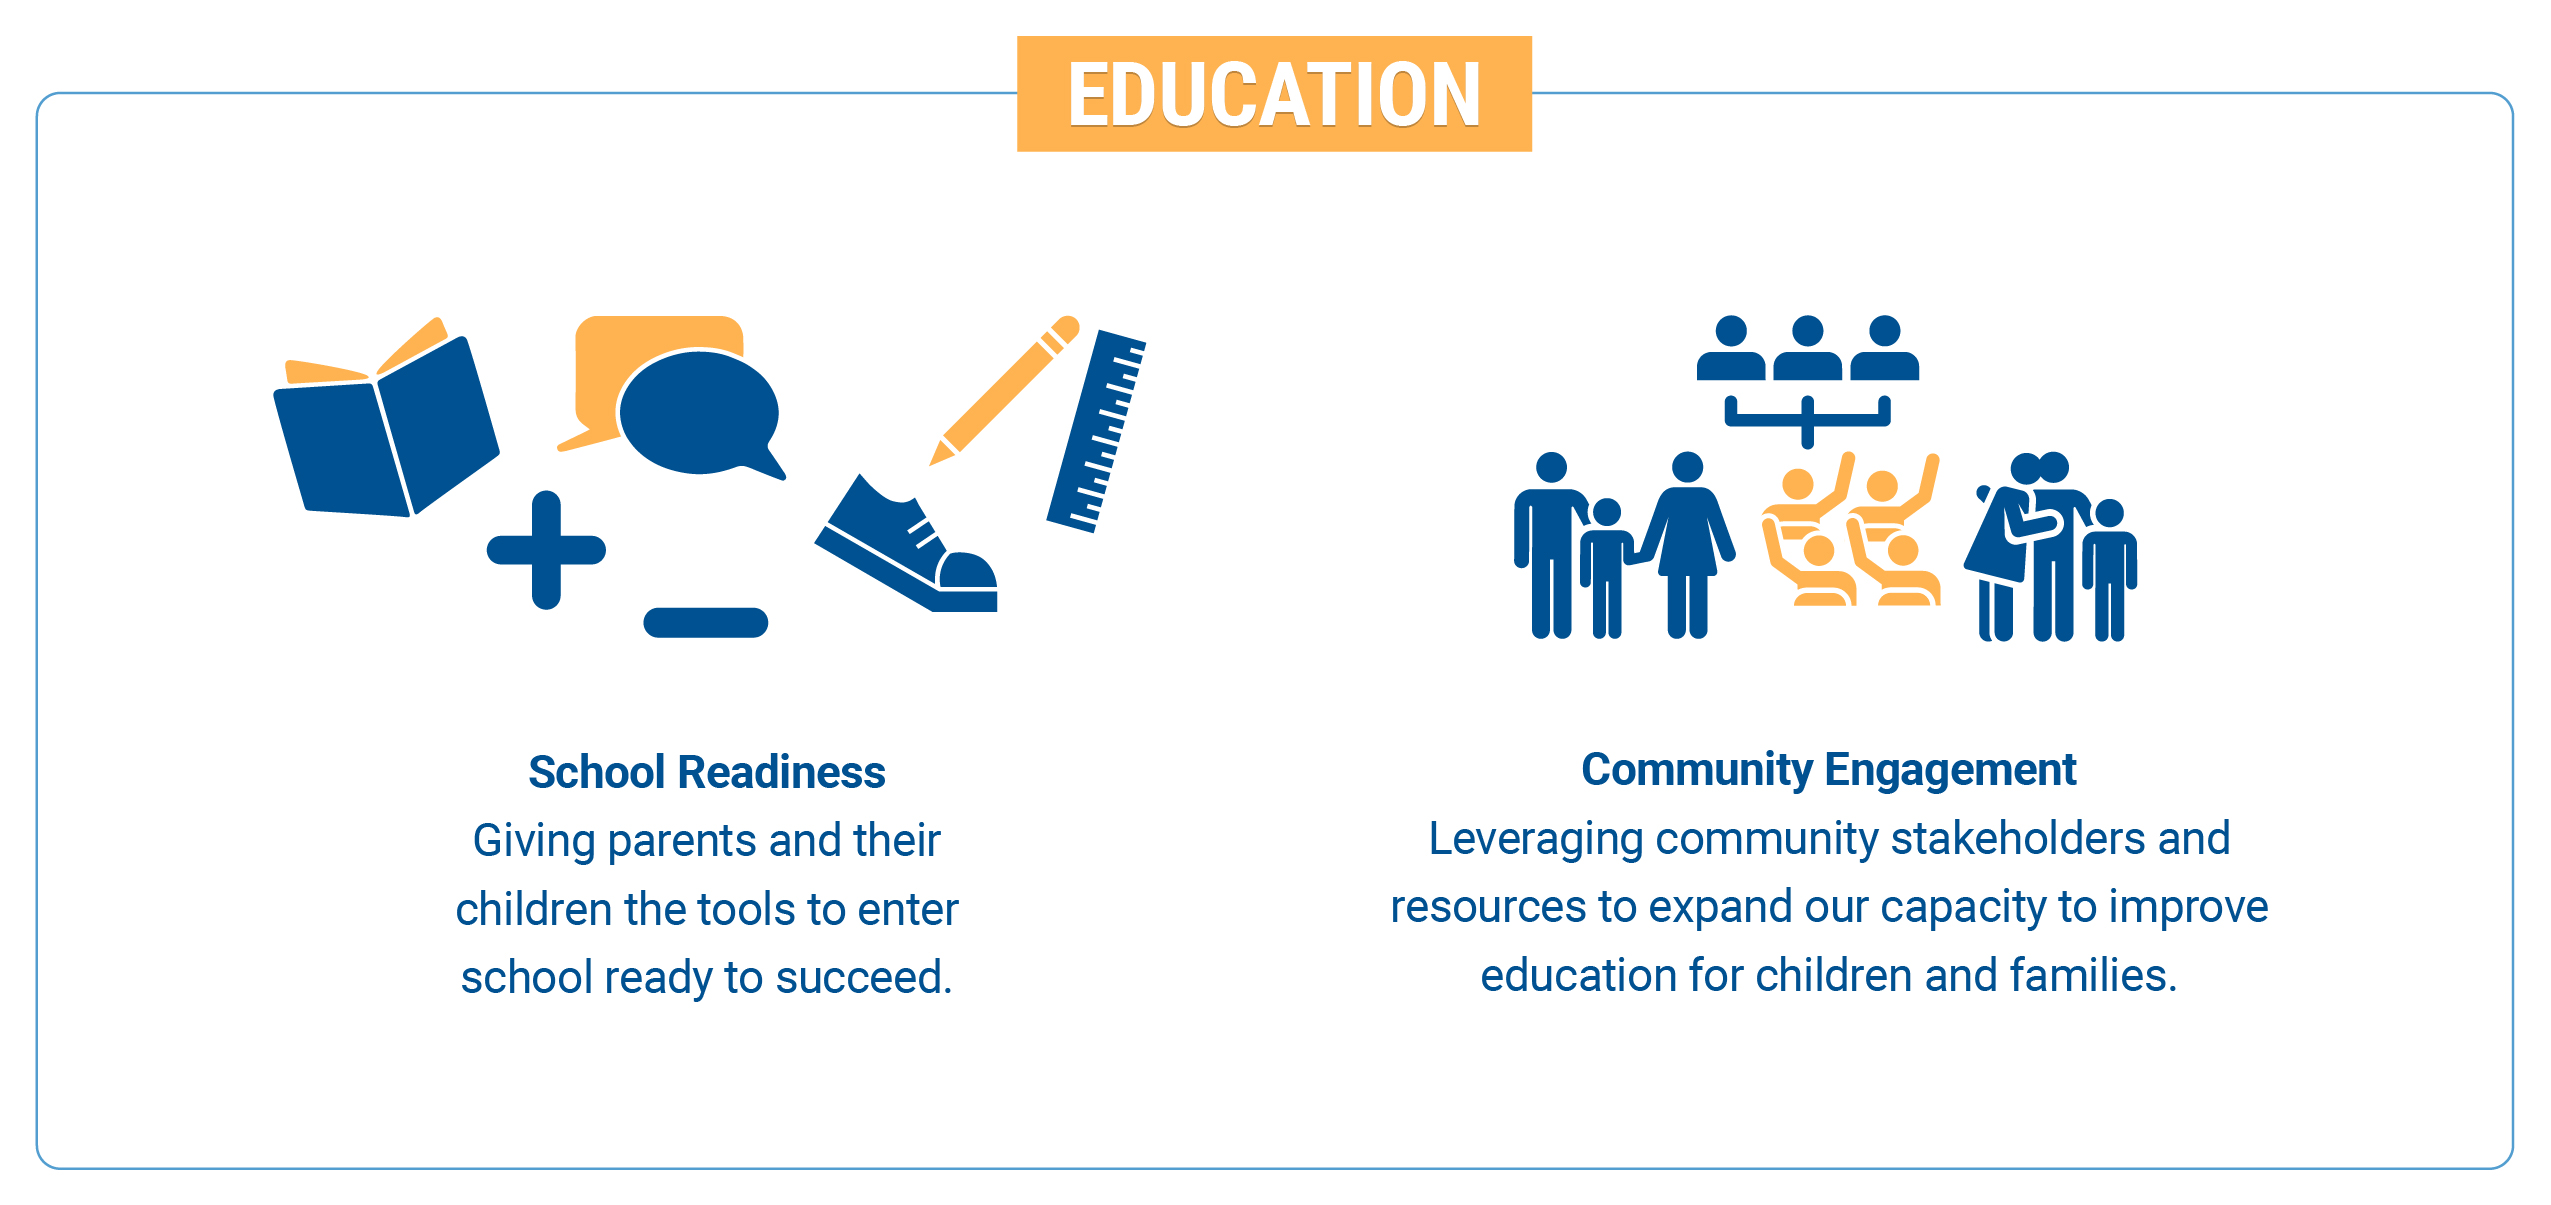 Education: School readiness, giving parents and their children the tools to enter school ready to succeed. Community Engagement: Leveraging community stakeholders and resources to expand our capacity to improve education for children and families. 